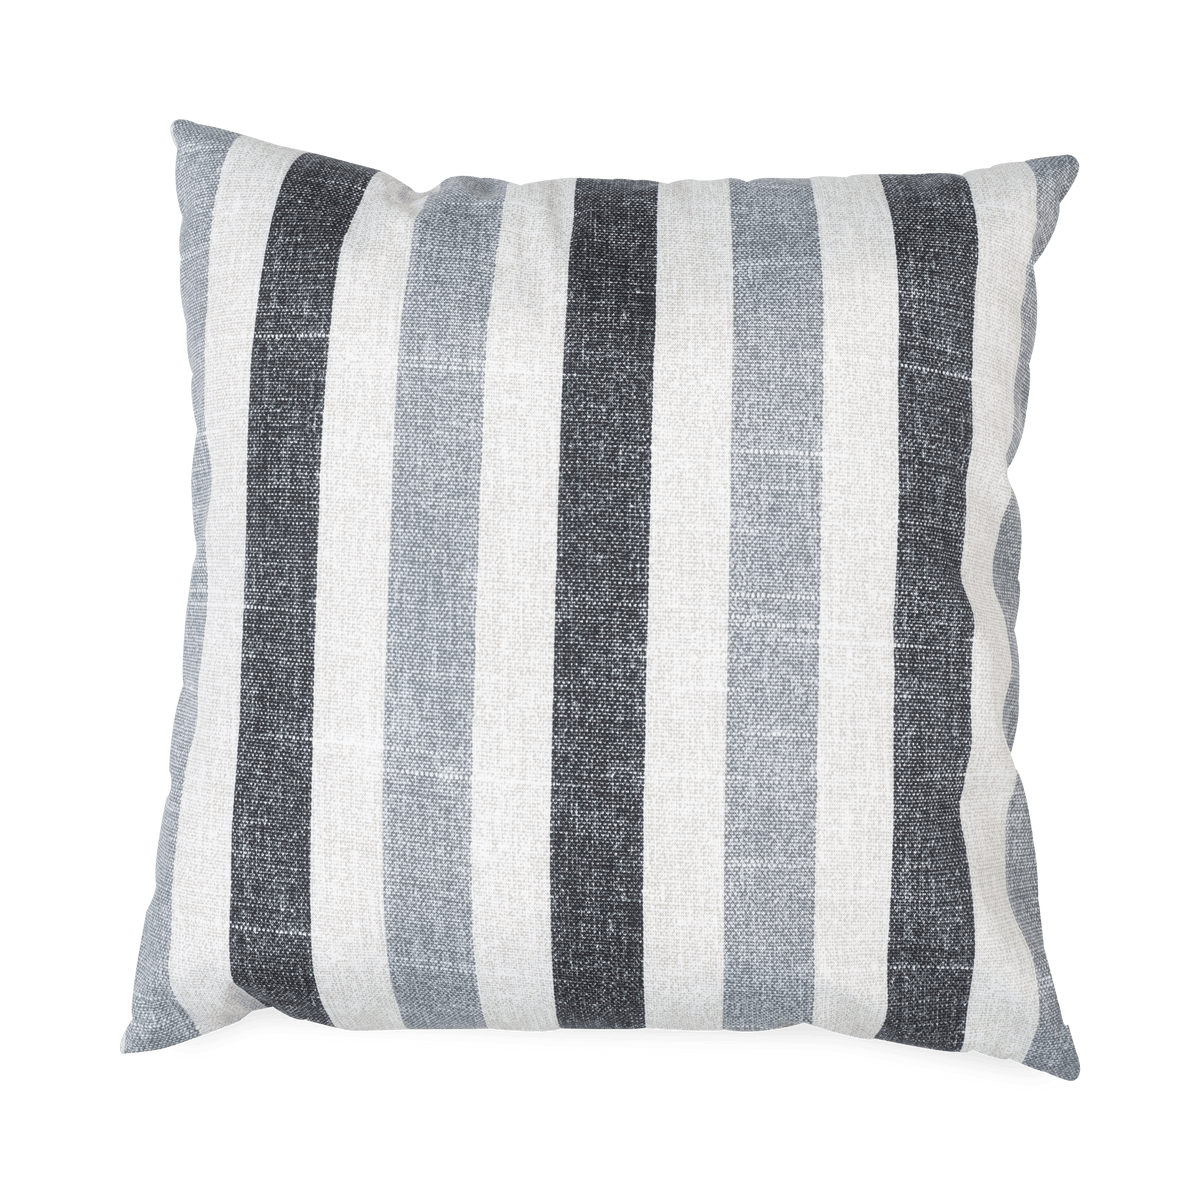 Full of personality and featuring a gorgeous, neutral toned striped body, the Striped Outdoor Pillow is woven with a comfortable, weather-resistant fabric.